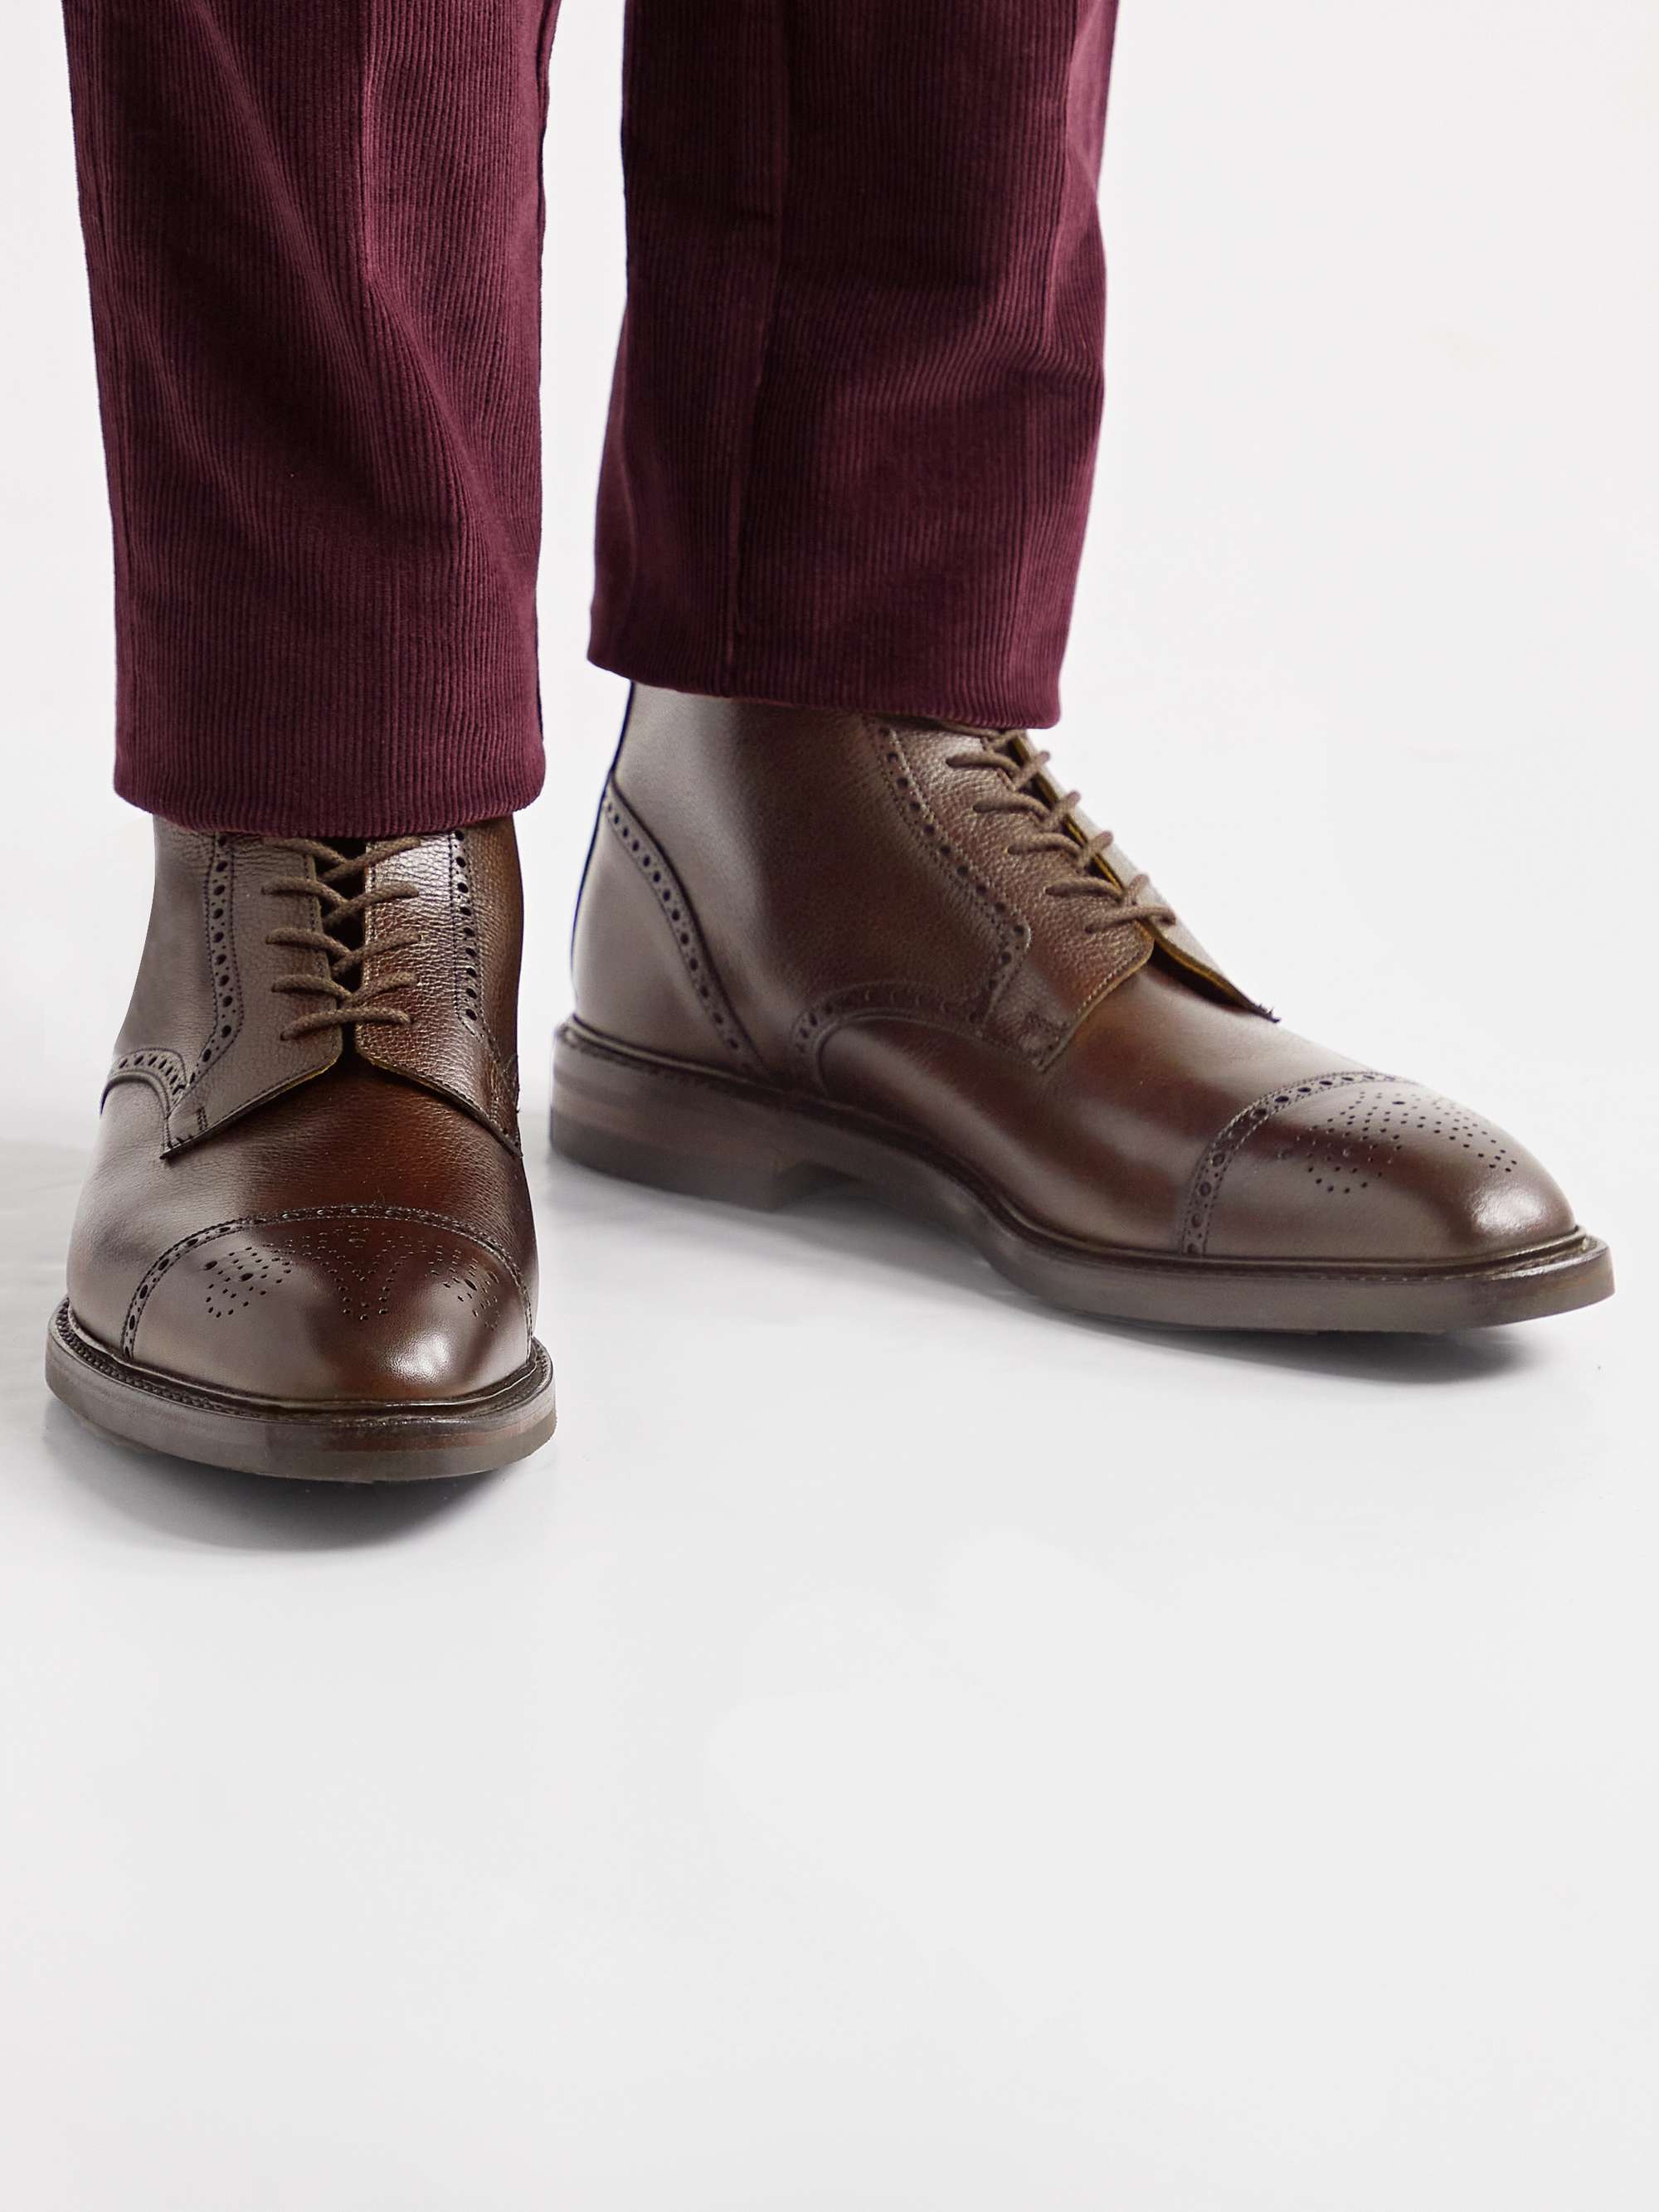 GEORGE CLEVERLEY Toby Pebble-Grain Leather Brogue Boots